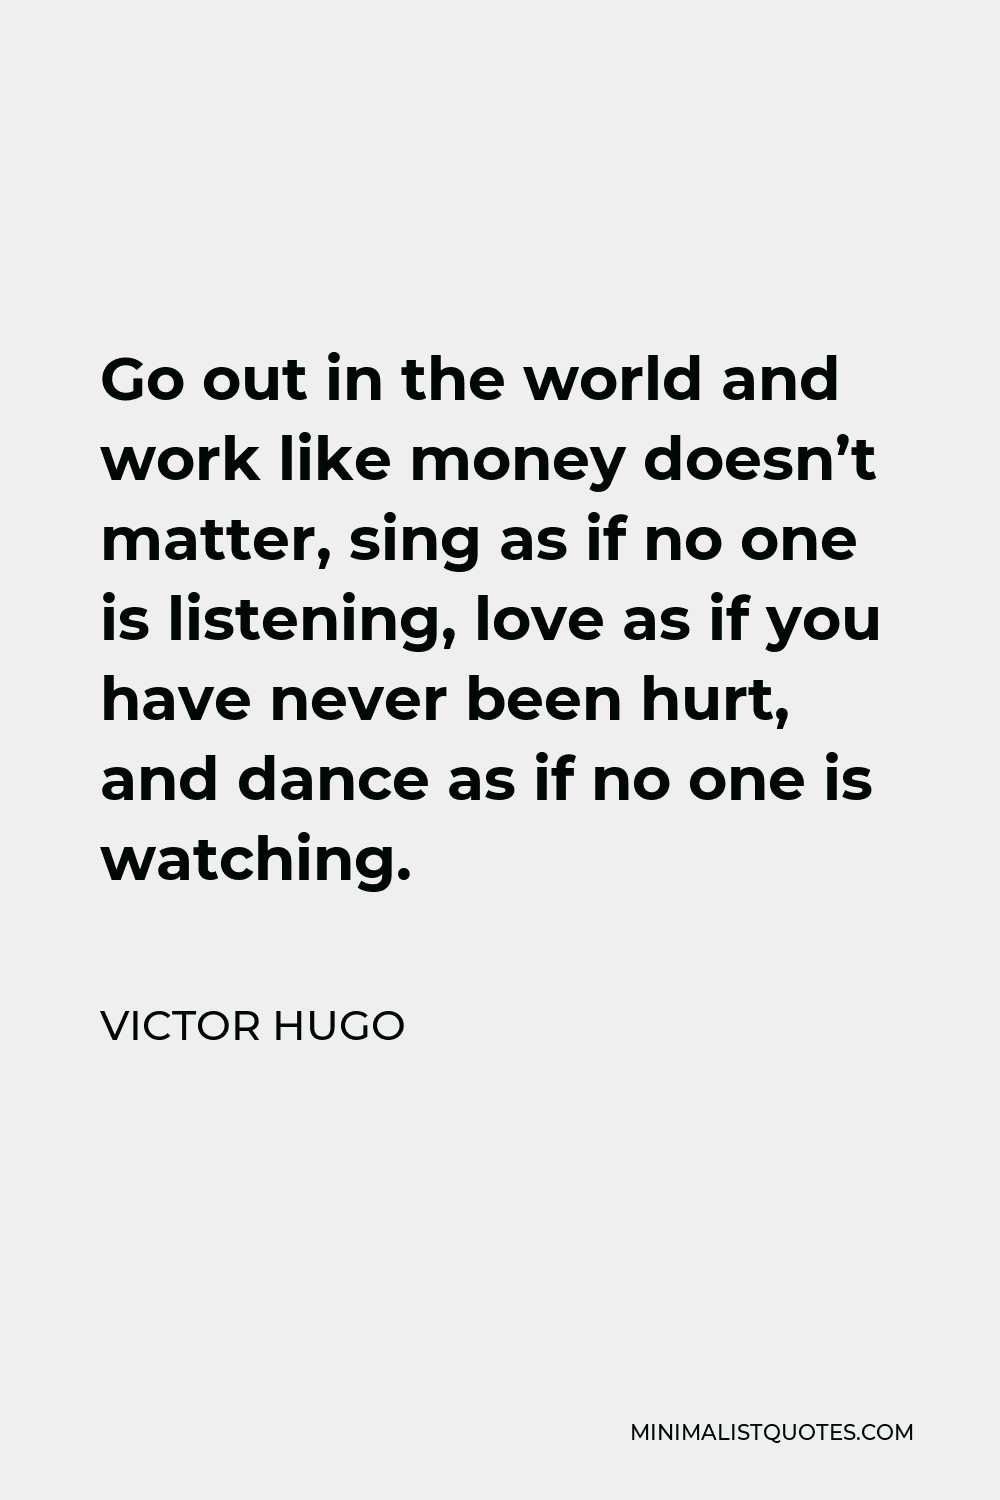 Victor Hugo Quote - Go out in the world and work like money doesn’t matter, sing as if no one is listening, love as if you have never been hurt, and dance as if no one is watching.